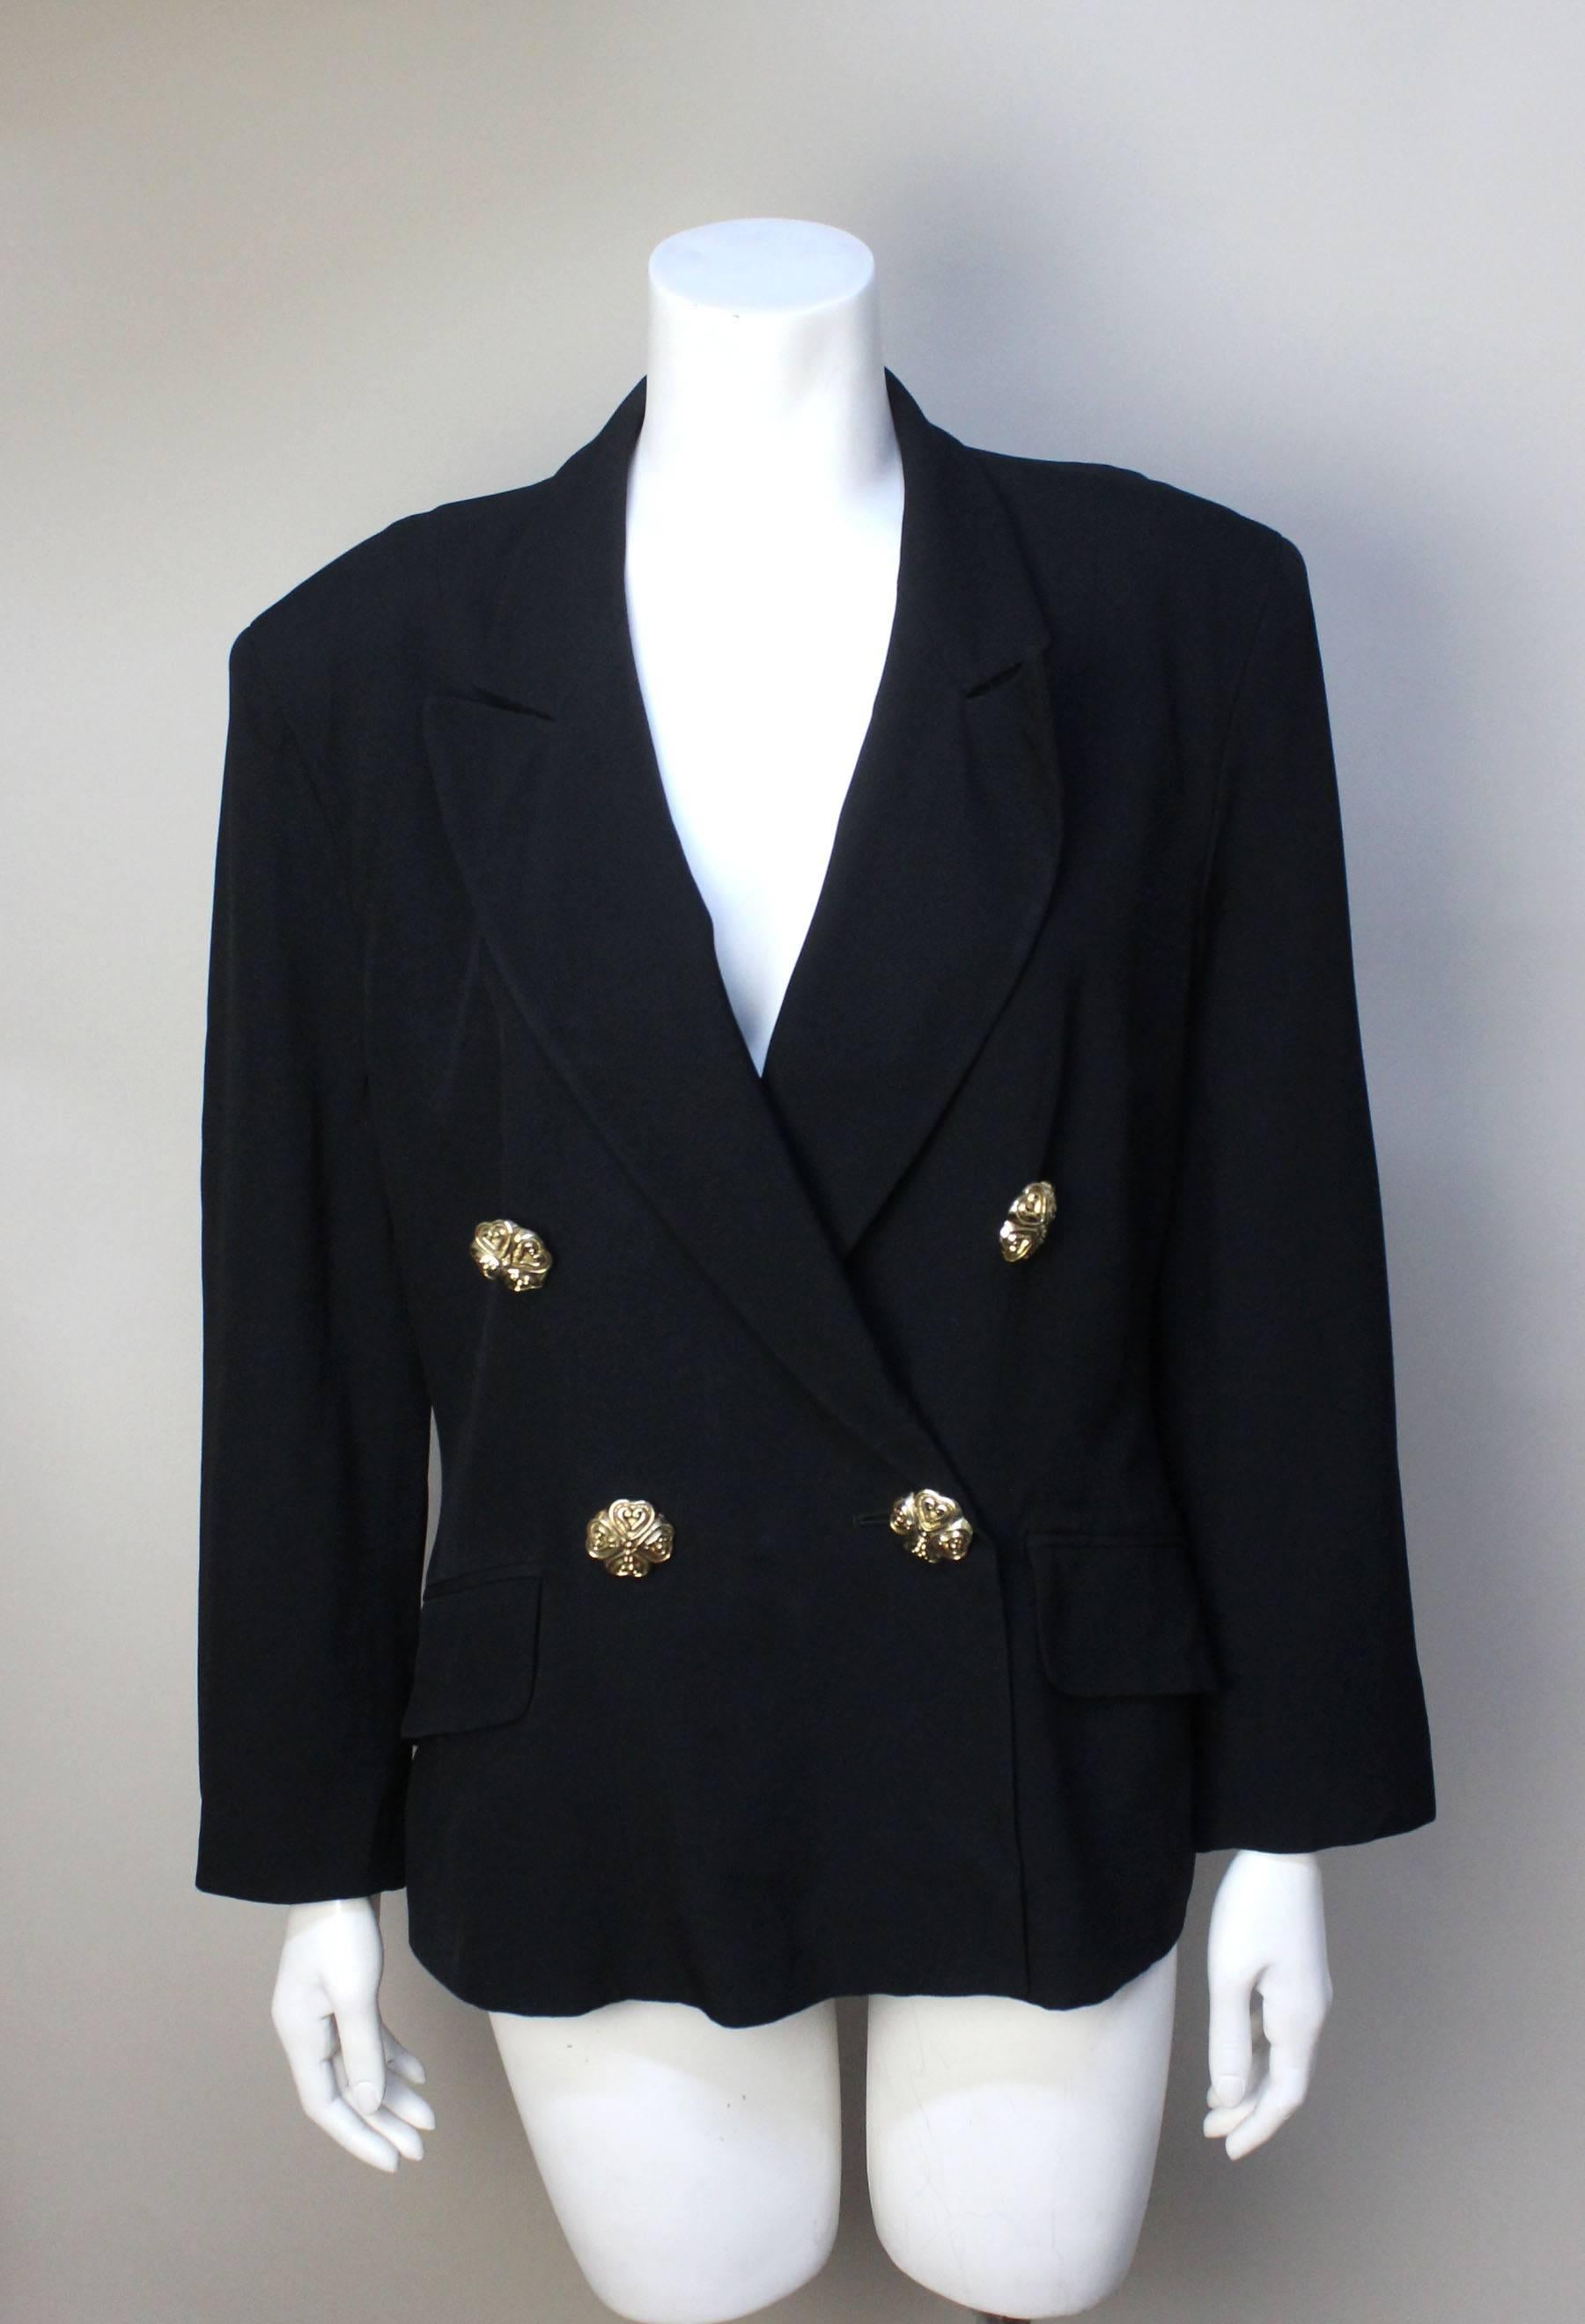 SALE!  Originally  $275
This Moschino jacket has a wonderful lining with the Cheap & Chic logo along with the date of the collection: Spring 1991 Collection No. 6. The fabric is a fine rayon that drapes beautifully on the body. It is double